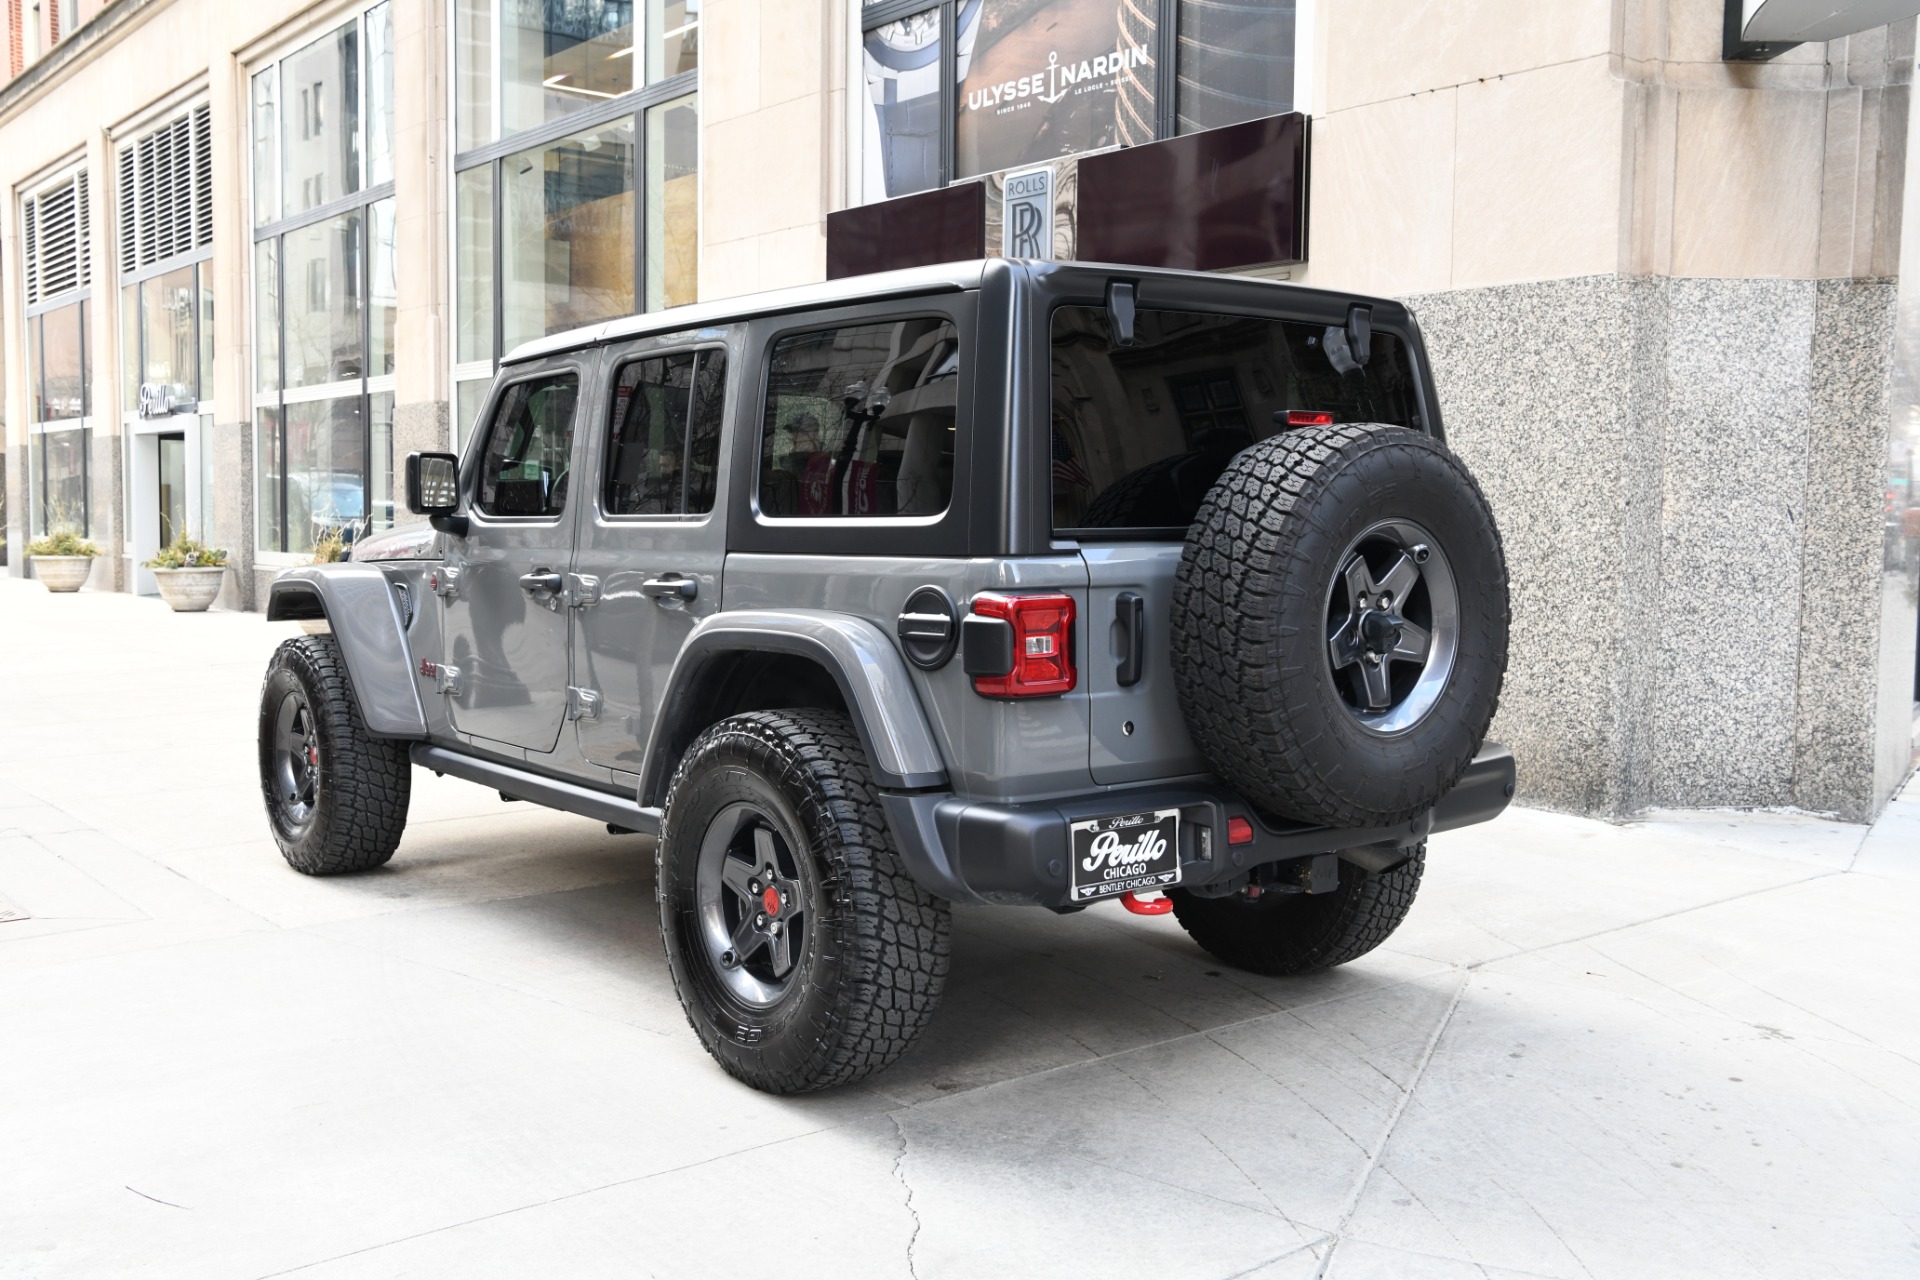 Used 2018 Jeep Wrangler Unlimited Rubicon For Sale (Sold) | Bentley Gold  Coast Chicago Stock #GC3125B